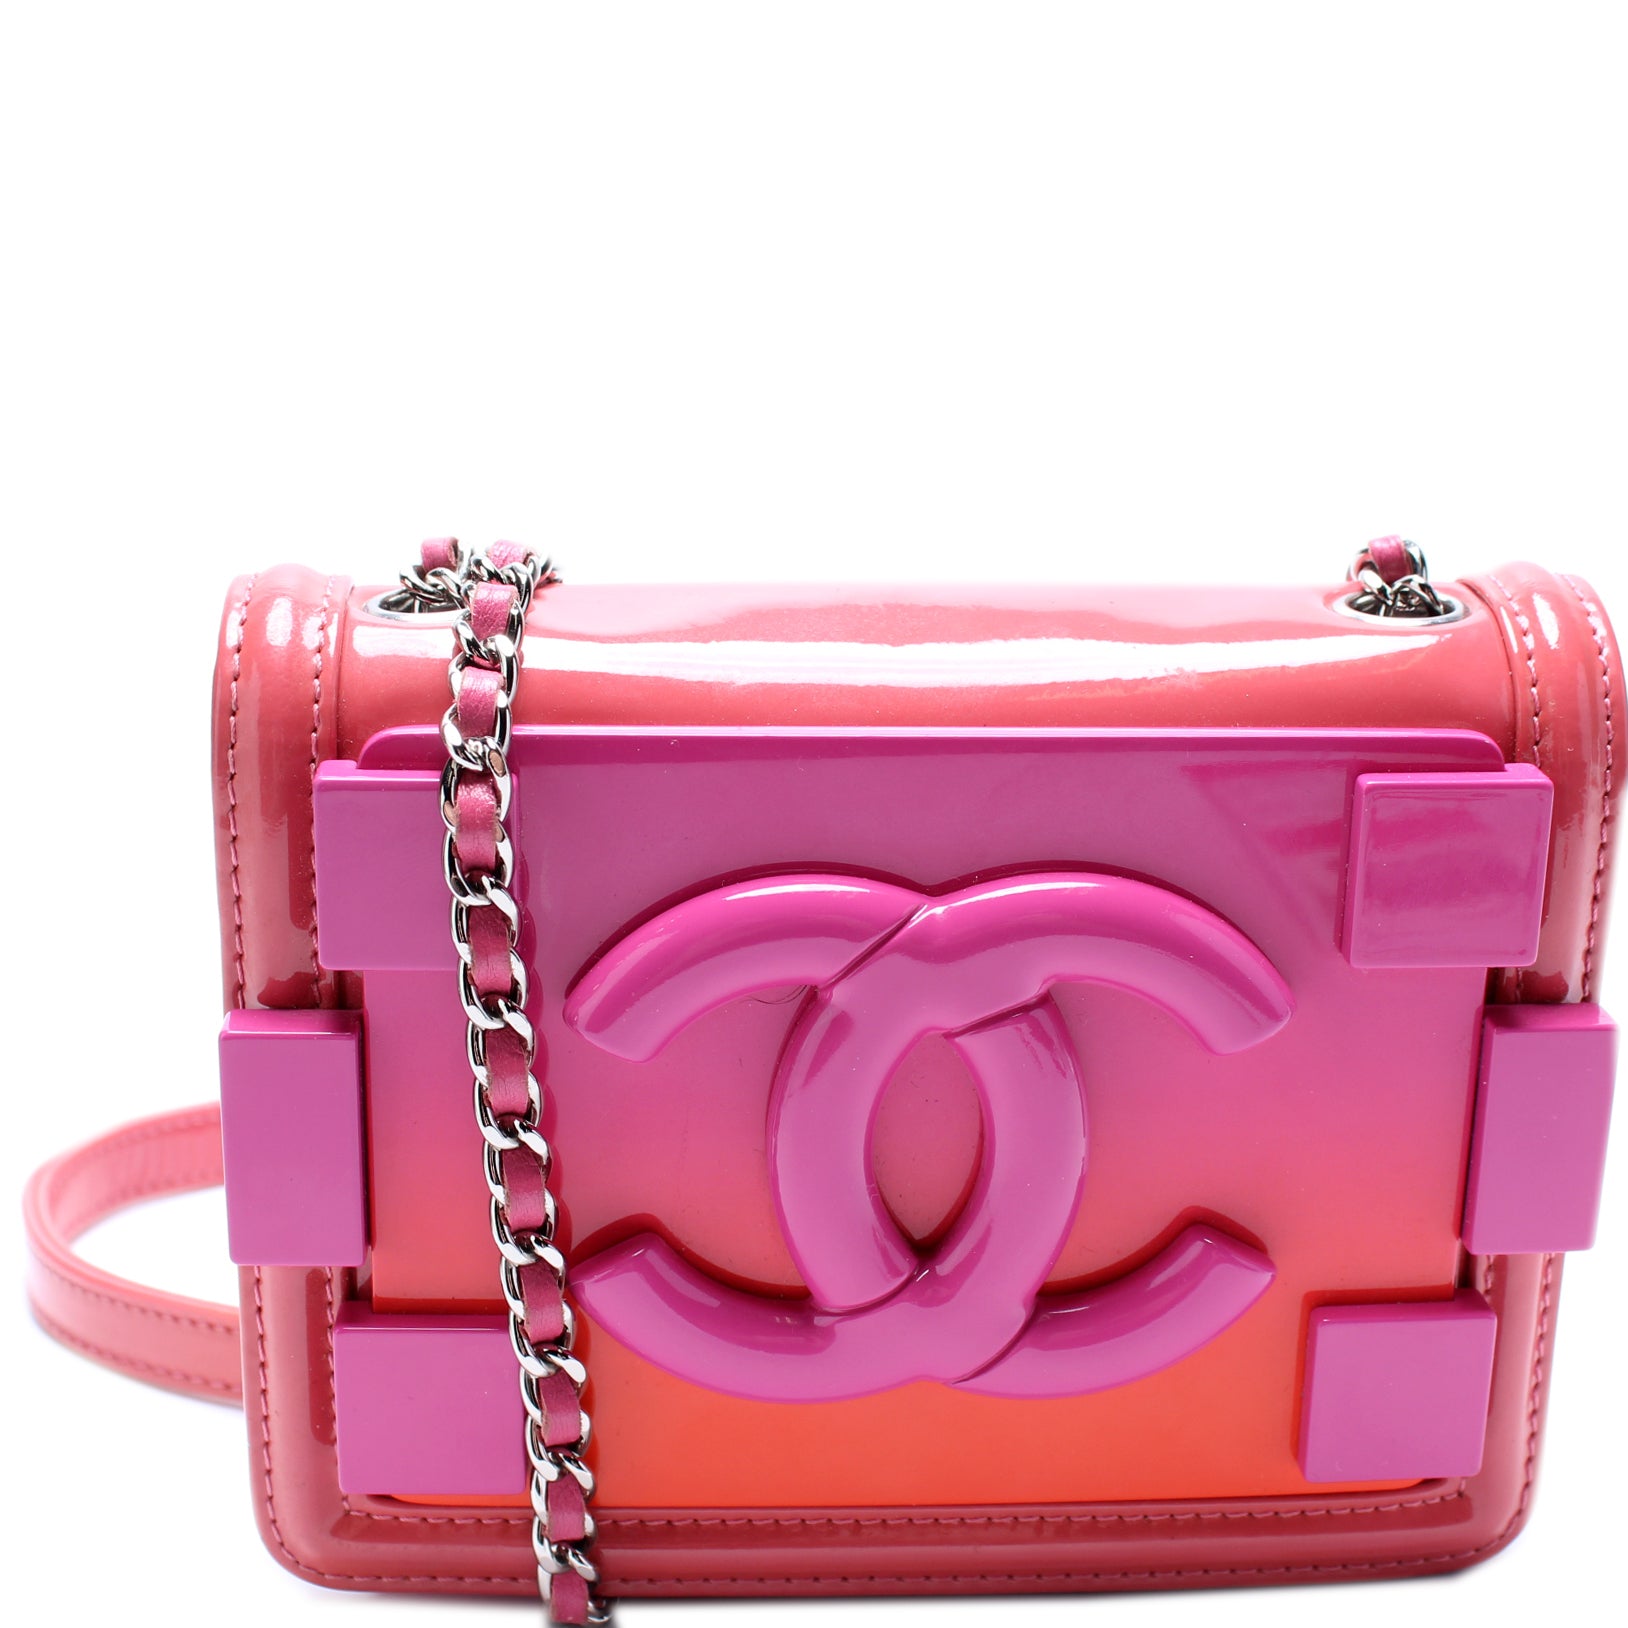 Chanel Lego Brick Bag, Bright Pink with Silver Hardware, Preowned in  Dustbag WA001